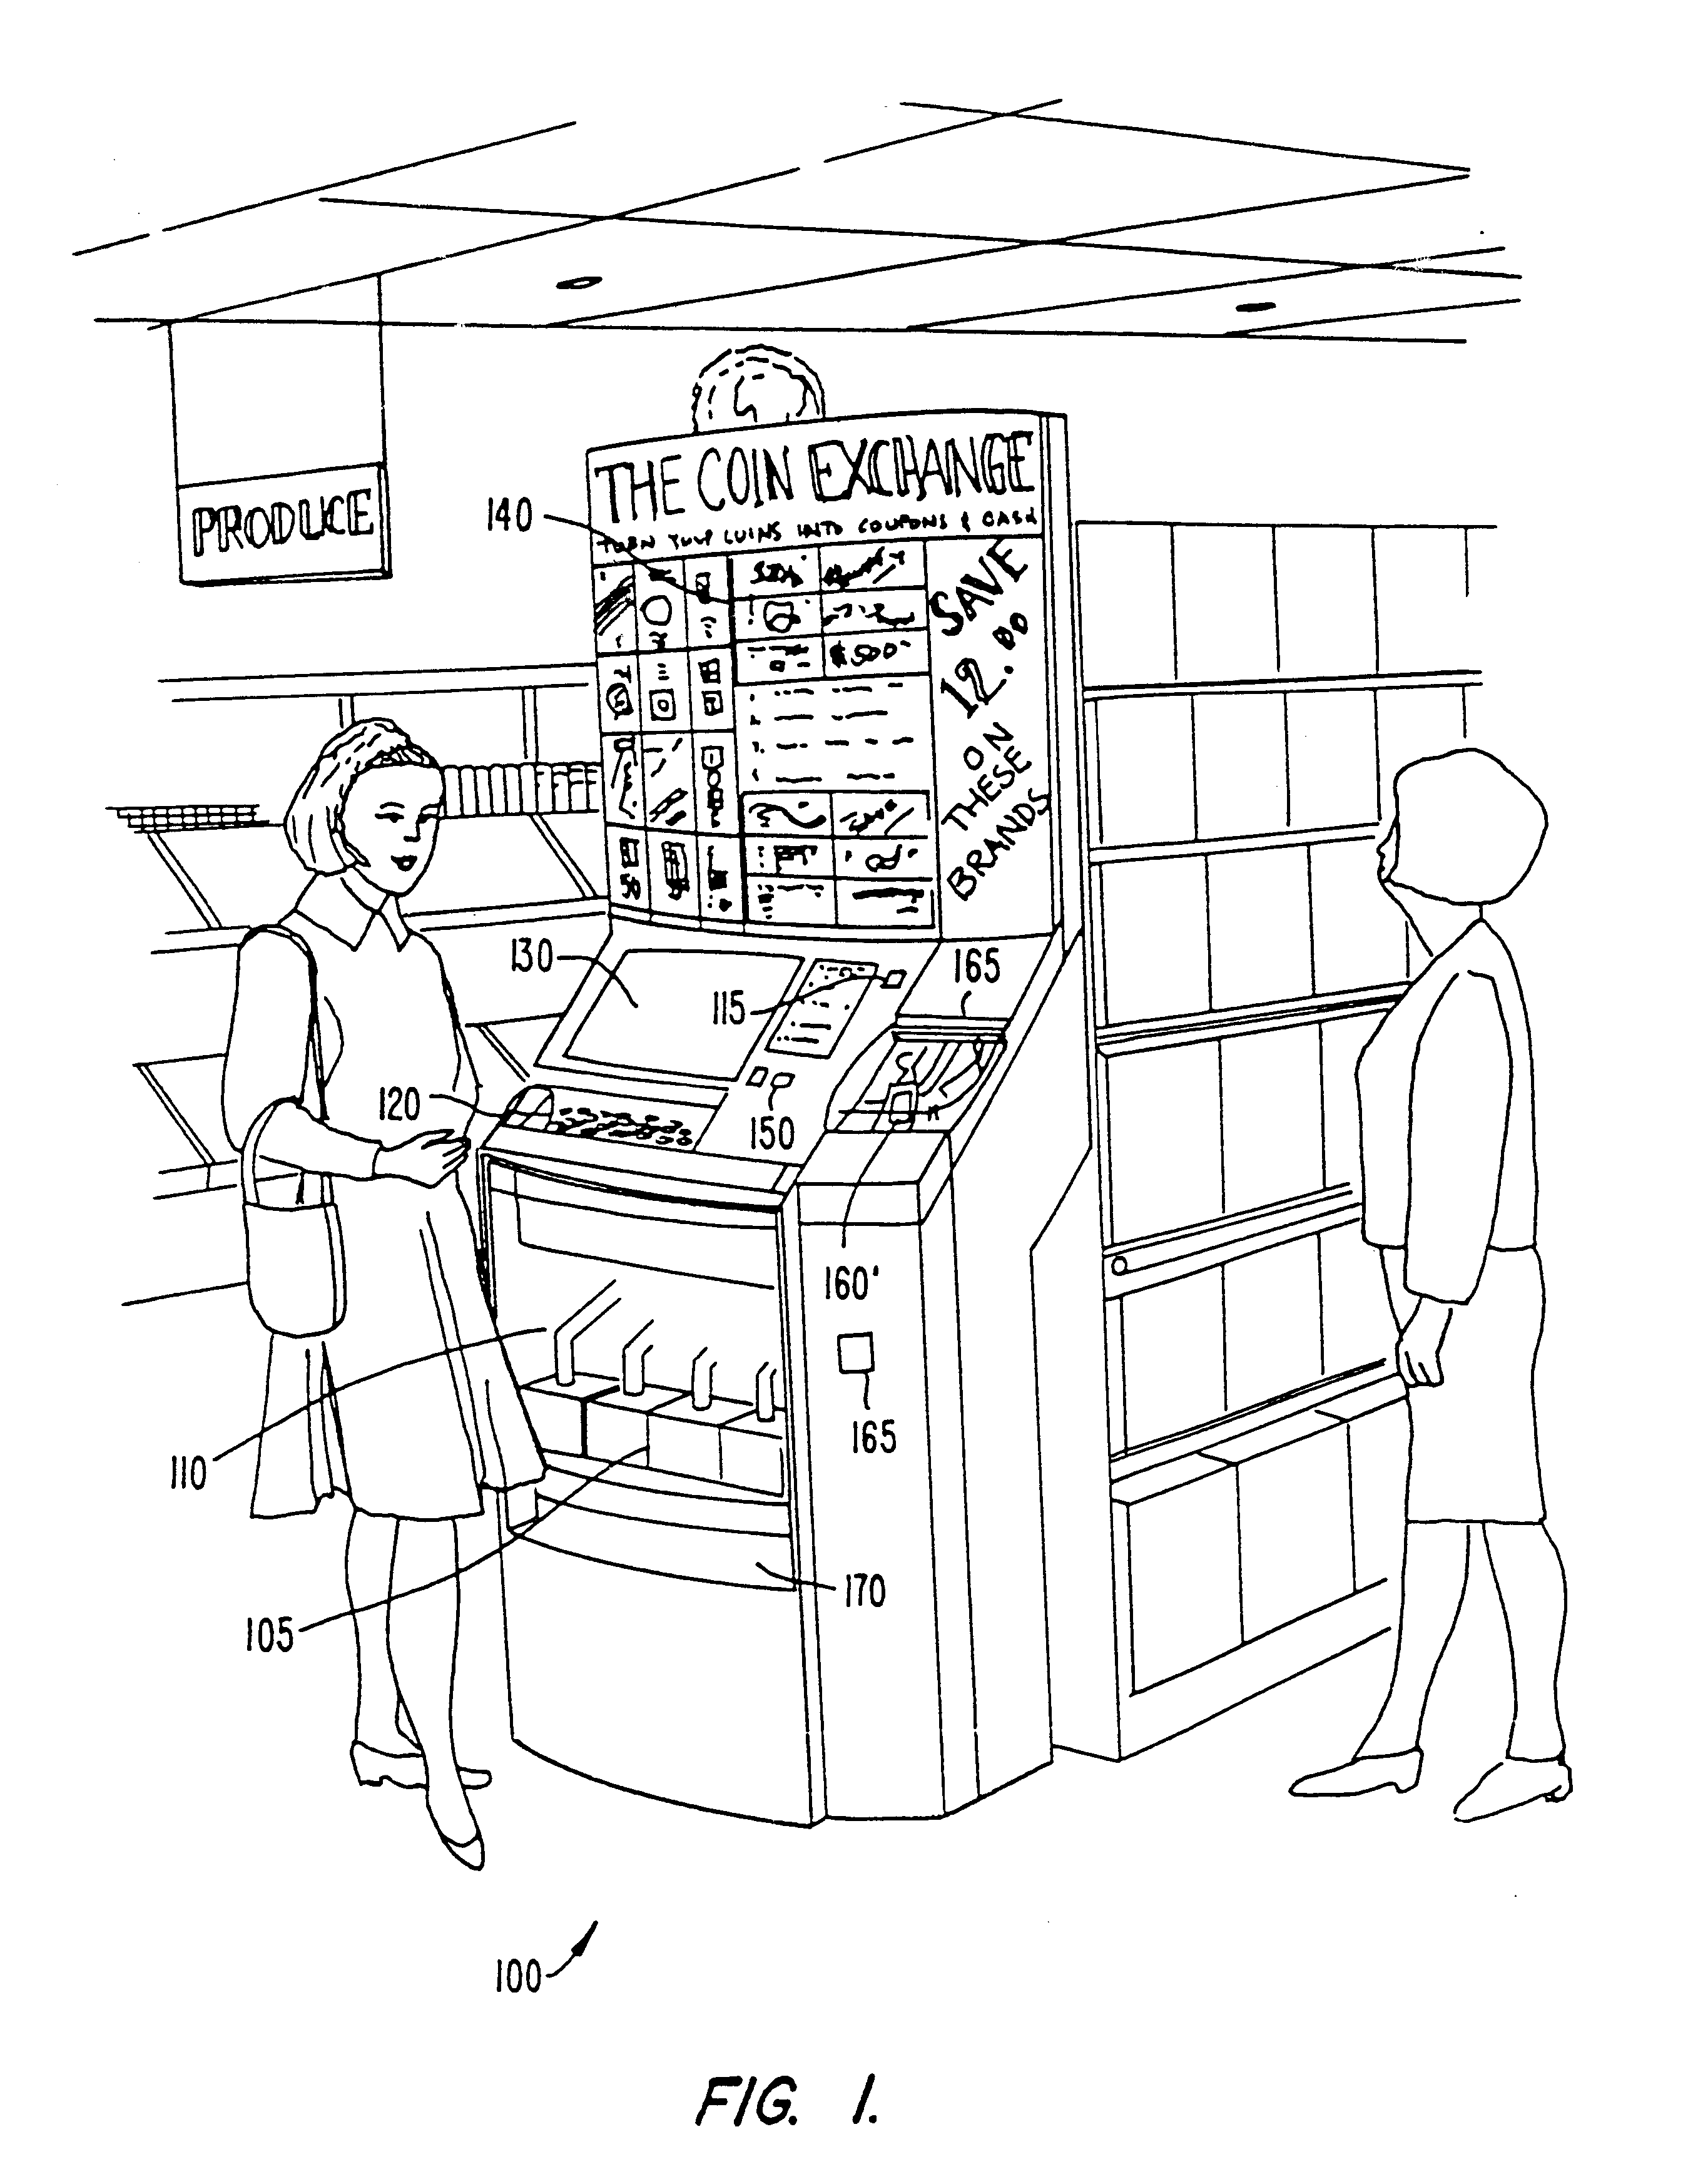 Coin counter and voucher dispensing machine and method